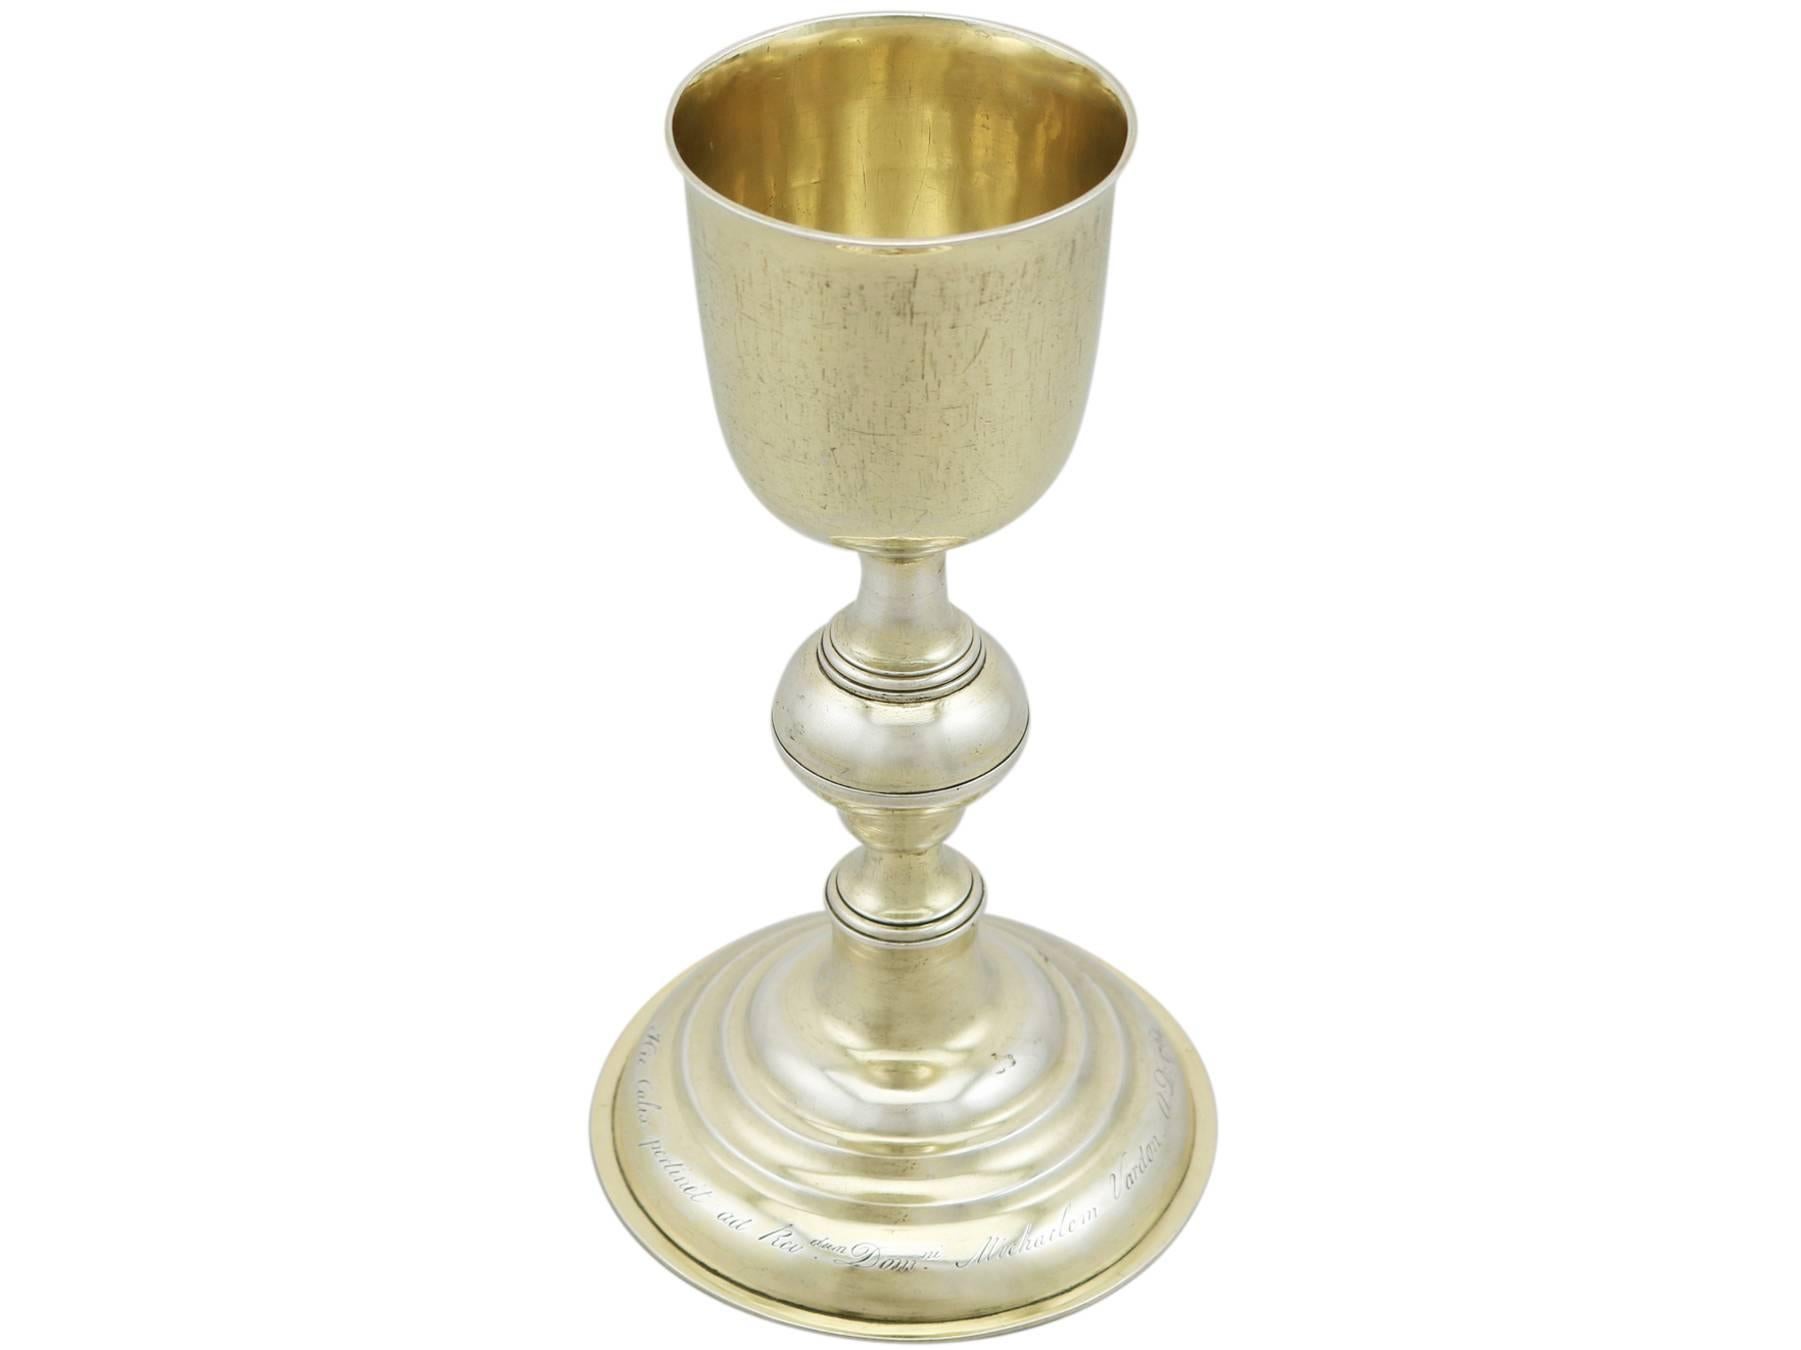 An exceptional, fine and impressive, antique Georgian Irish sterling silver chalice; an addition to AC Silver's collection of wine and drinks related silverware .

This exceptional antique George III Irish sterling silver ecclesiastical chalice